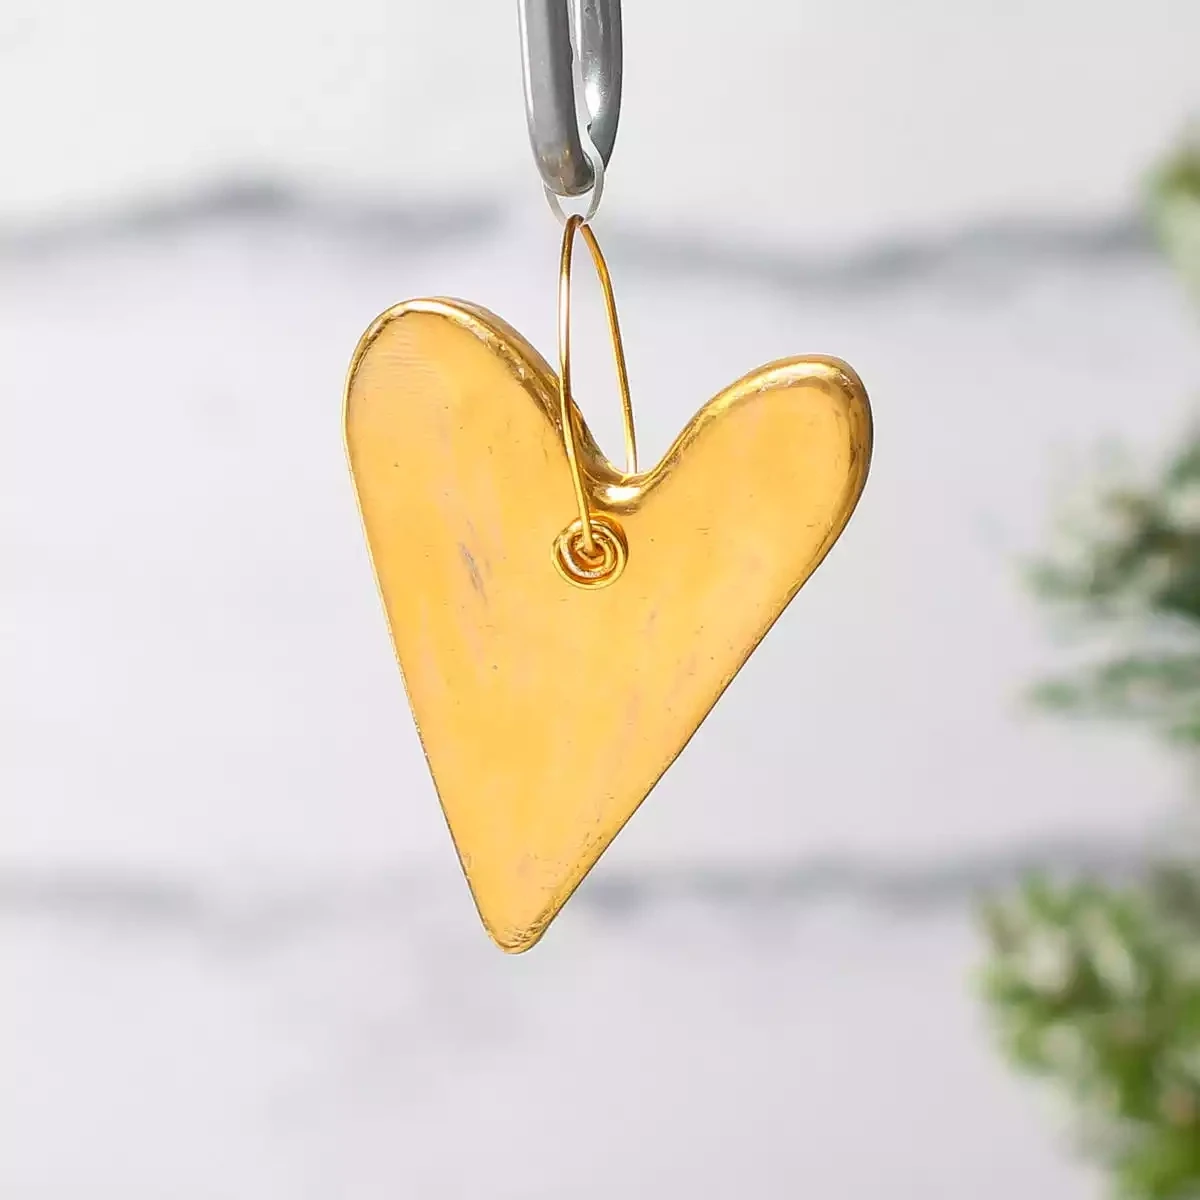 Gold Heart Ceramic Decoration by Sophie Smith